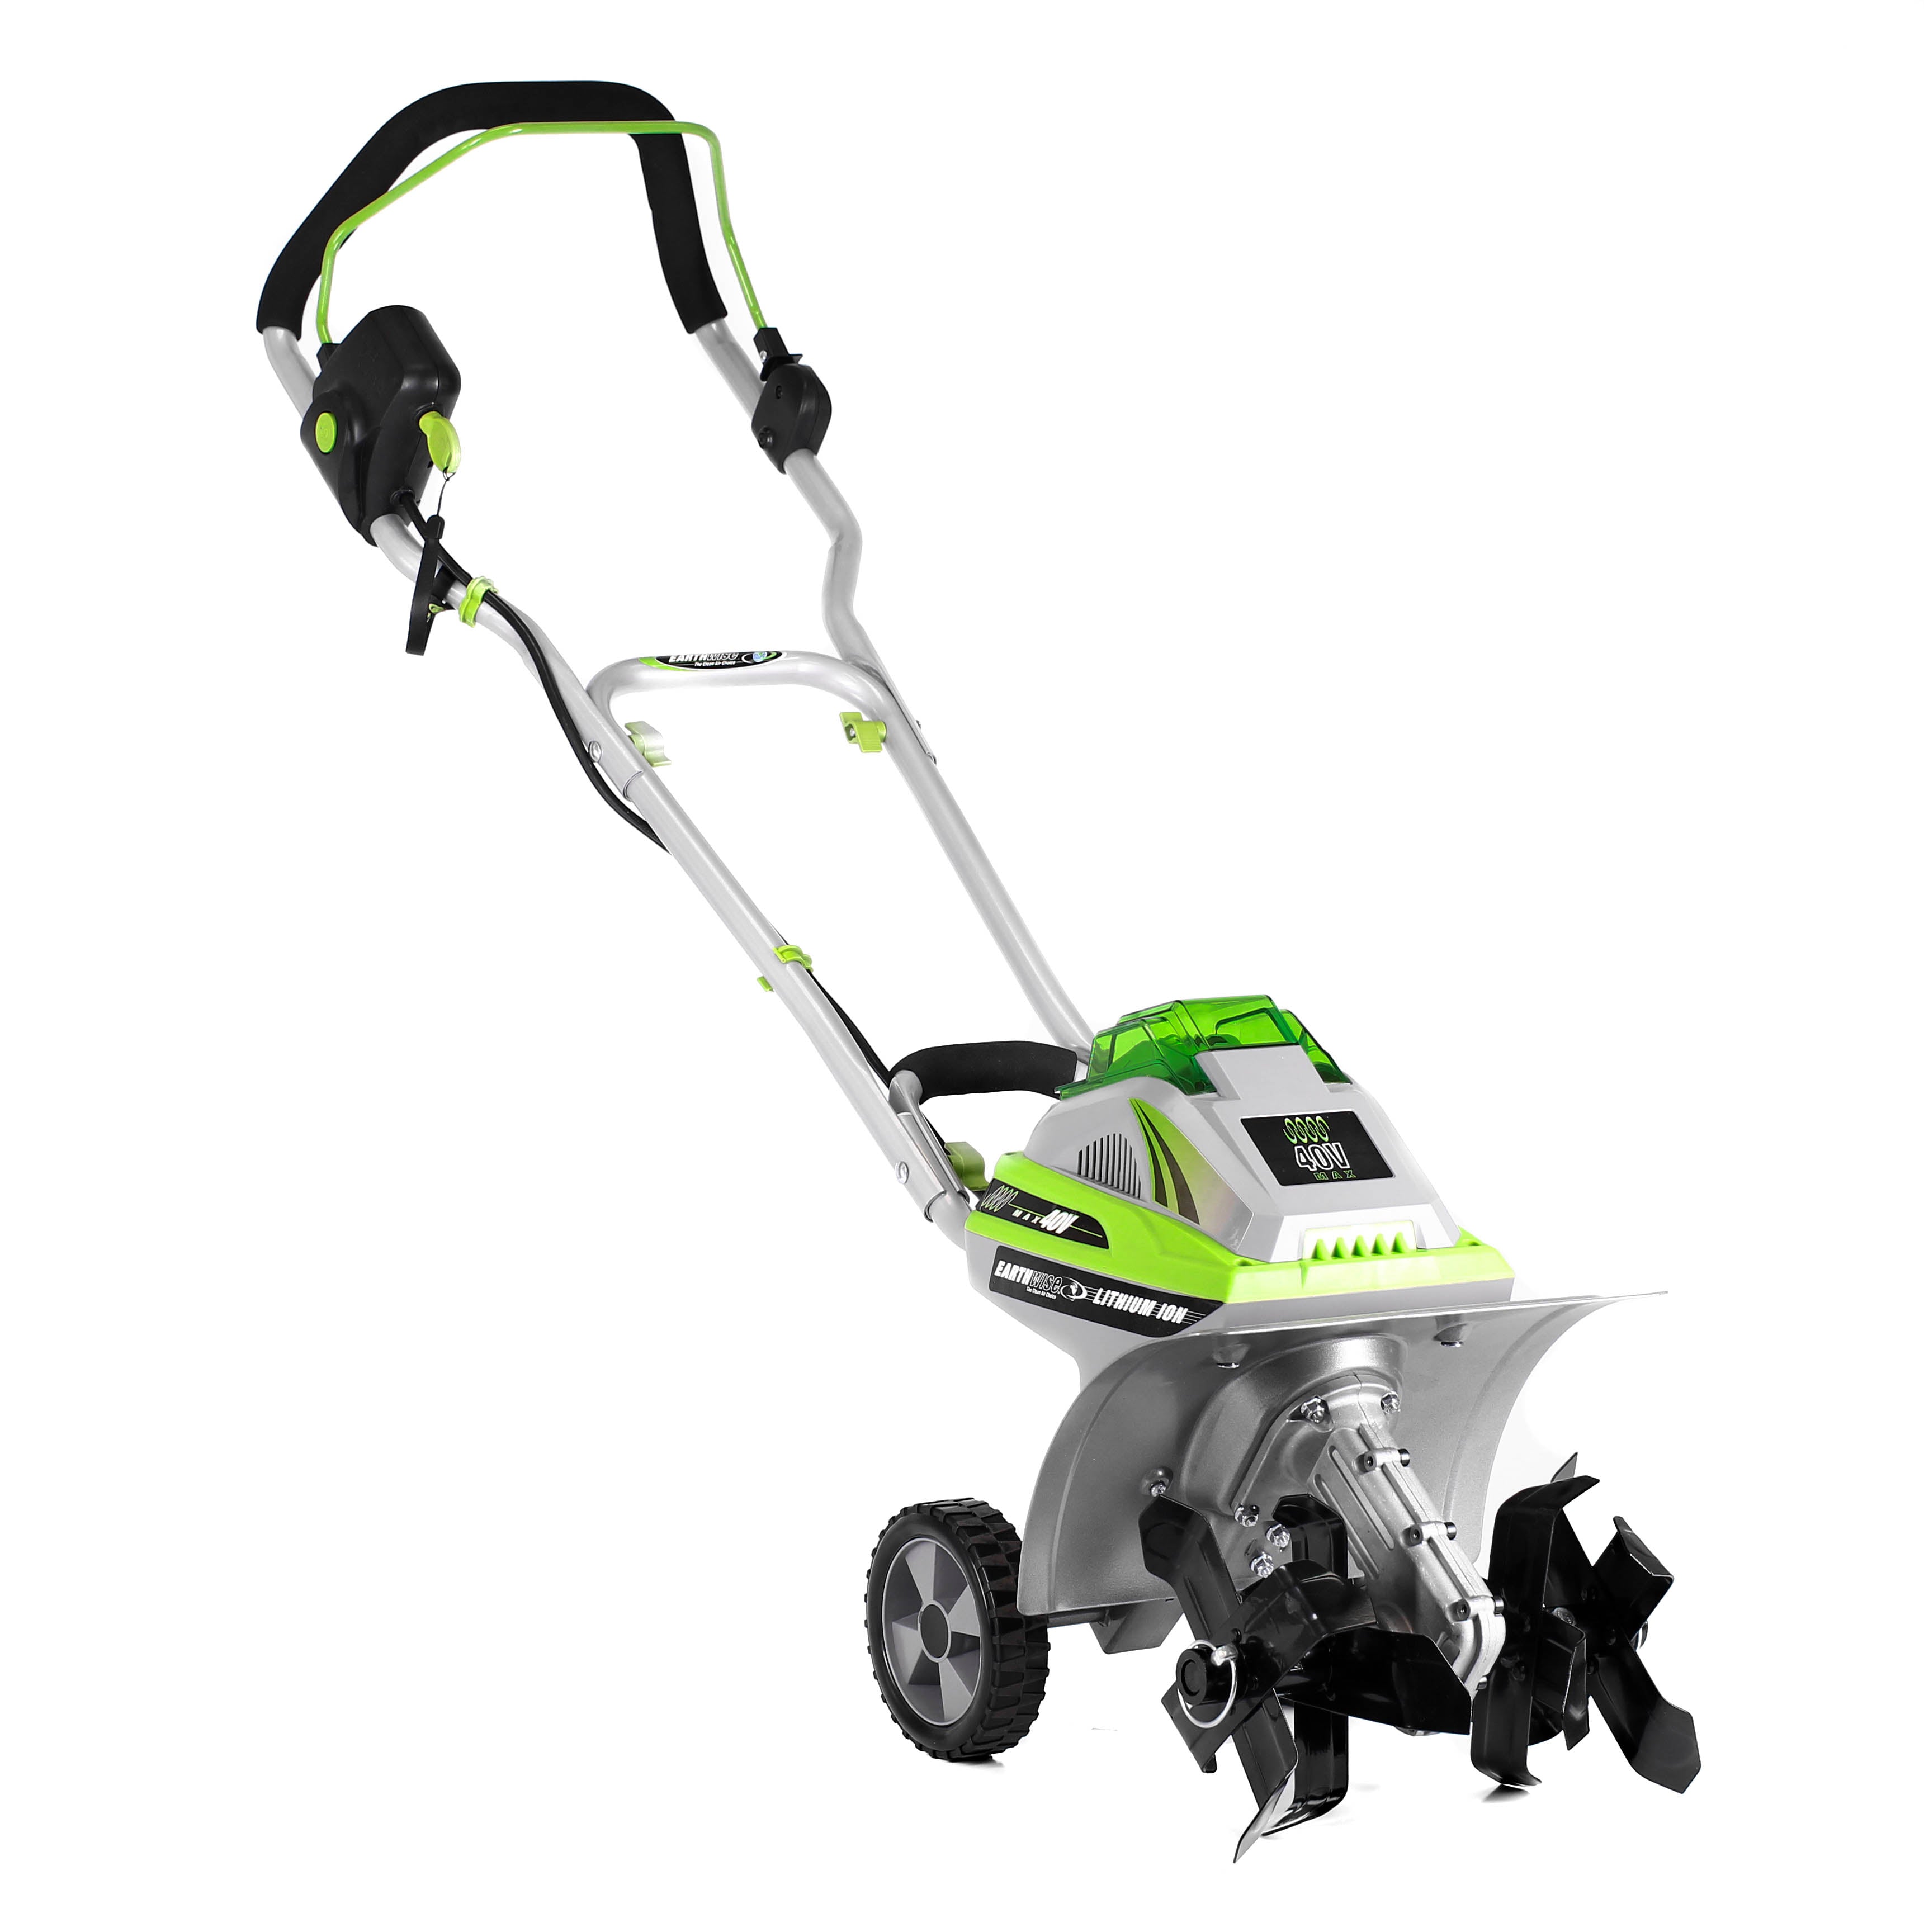 Earthwise Power Tools by ALM 11" 40V 4Ah Lithium Tiller/Cultivator